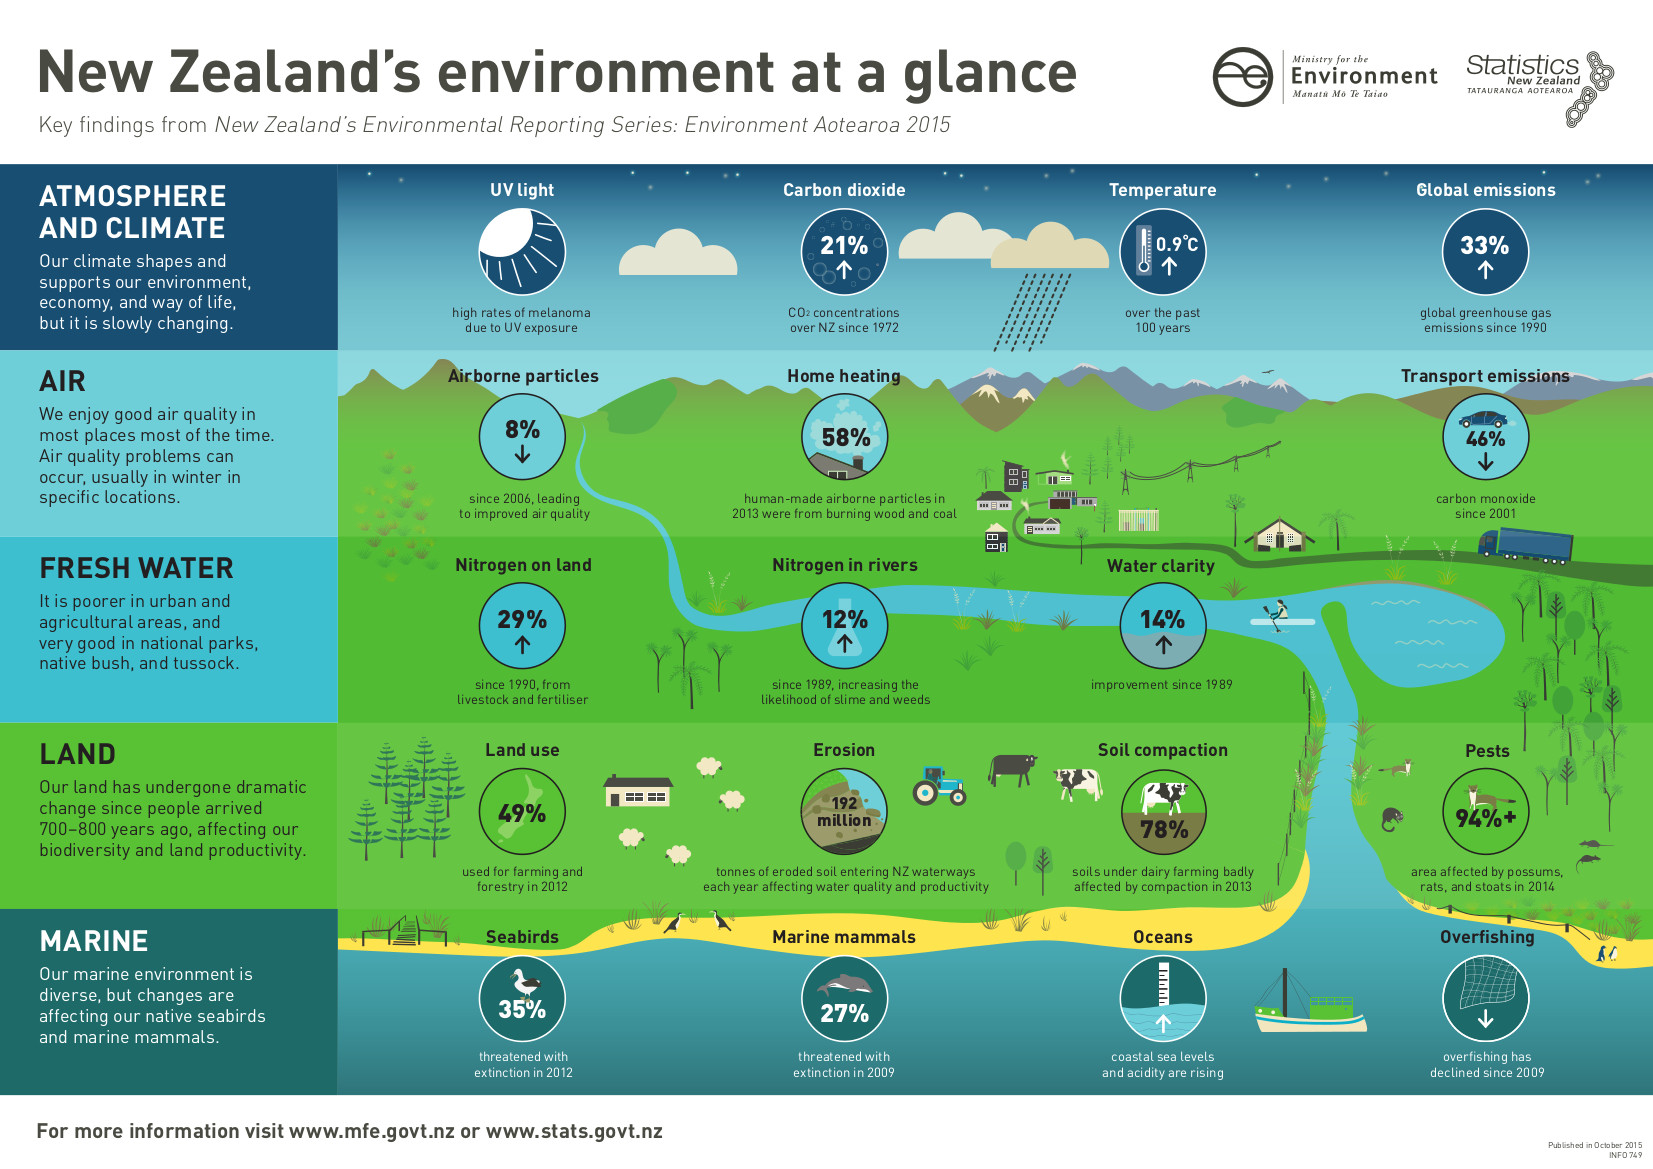 Serious concerns raised in NZ about environmental impact of major